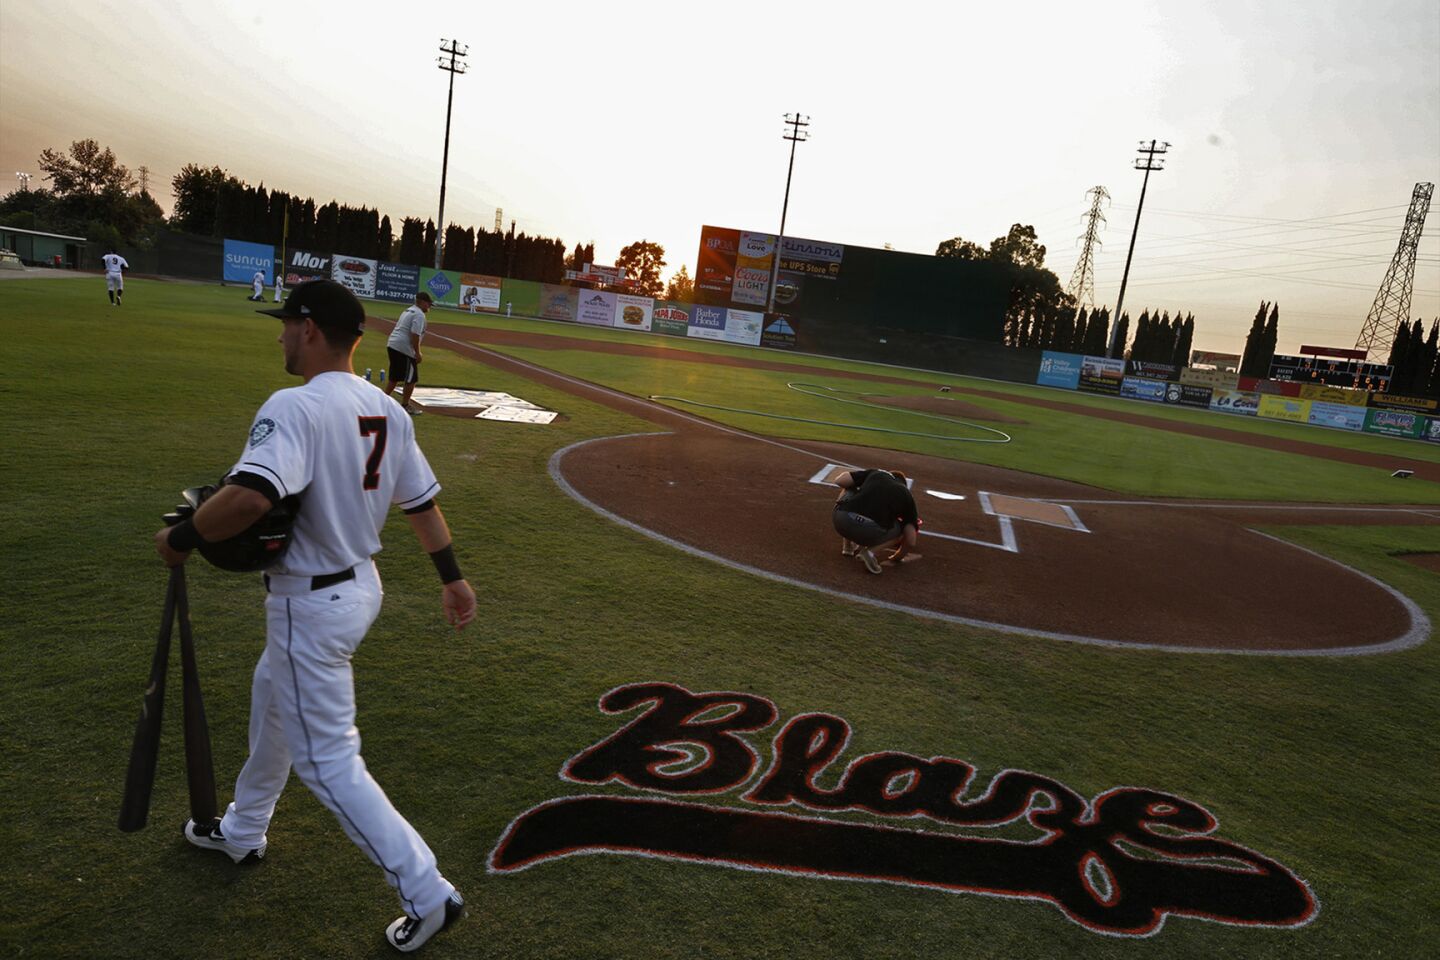 Bakersfield Blaze infielder Justin Seager walks on to the durgoutbefore the start of a gameagainst the Stockton Ports at Sam Lynn Ballpark.